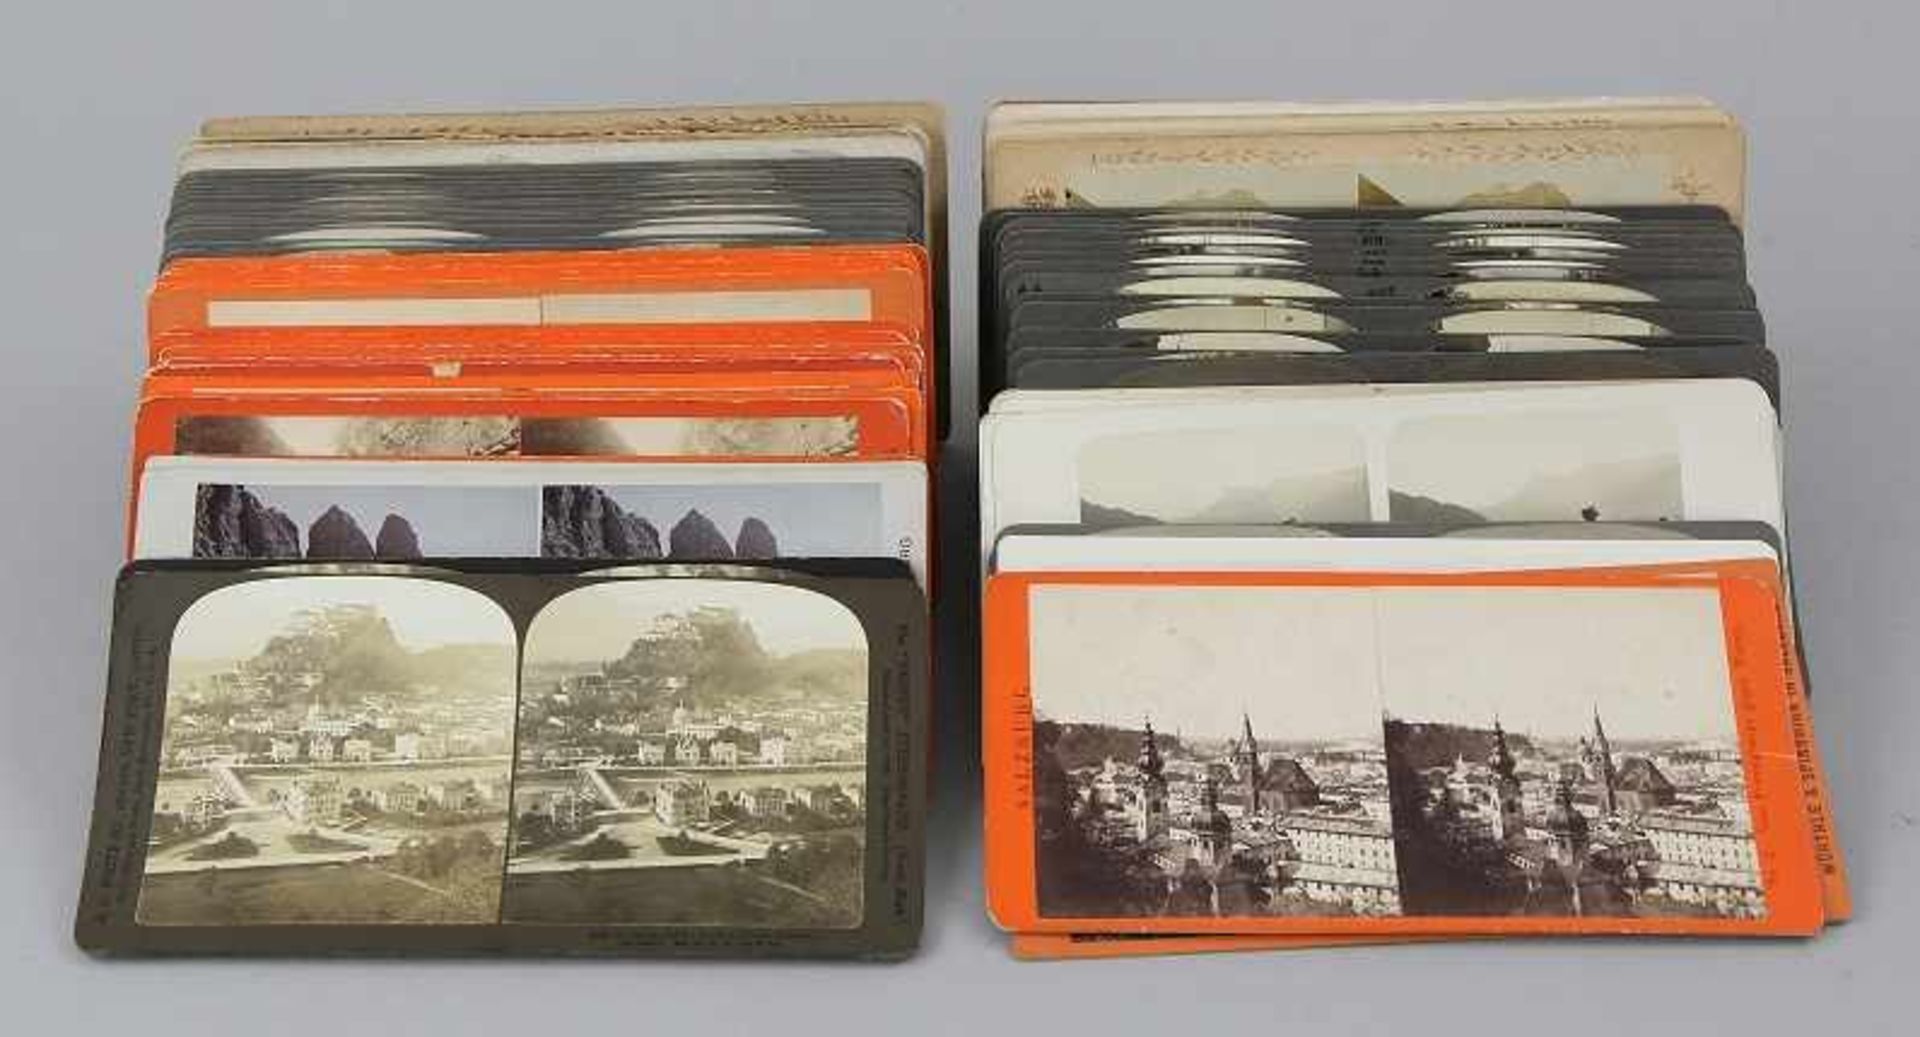 Large Bundle of 93 Stereoscopic Cards "Austria, Tyrol and Switzerland"